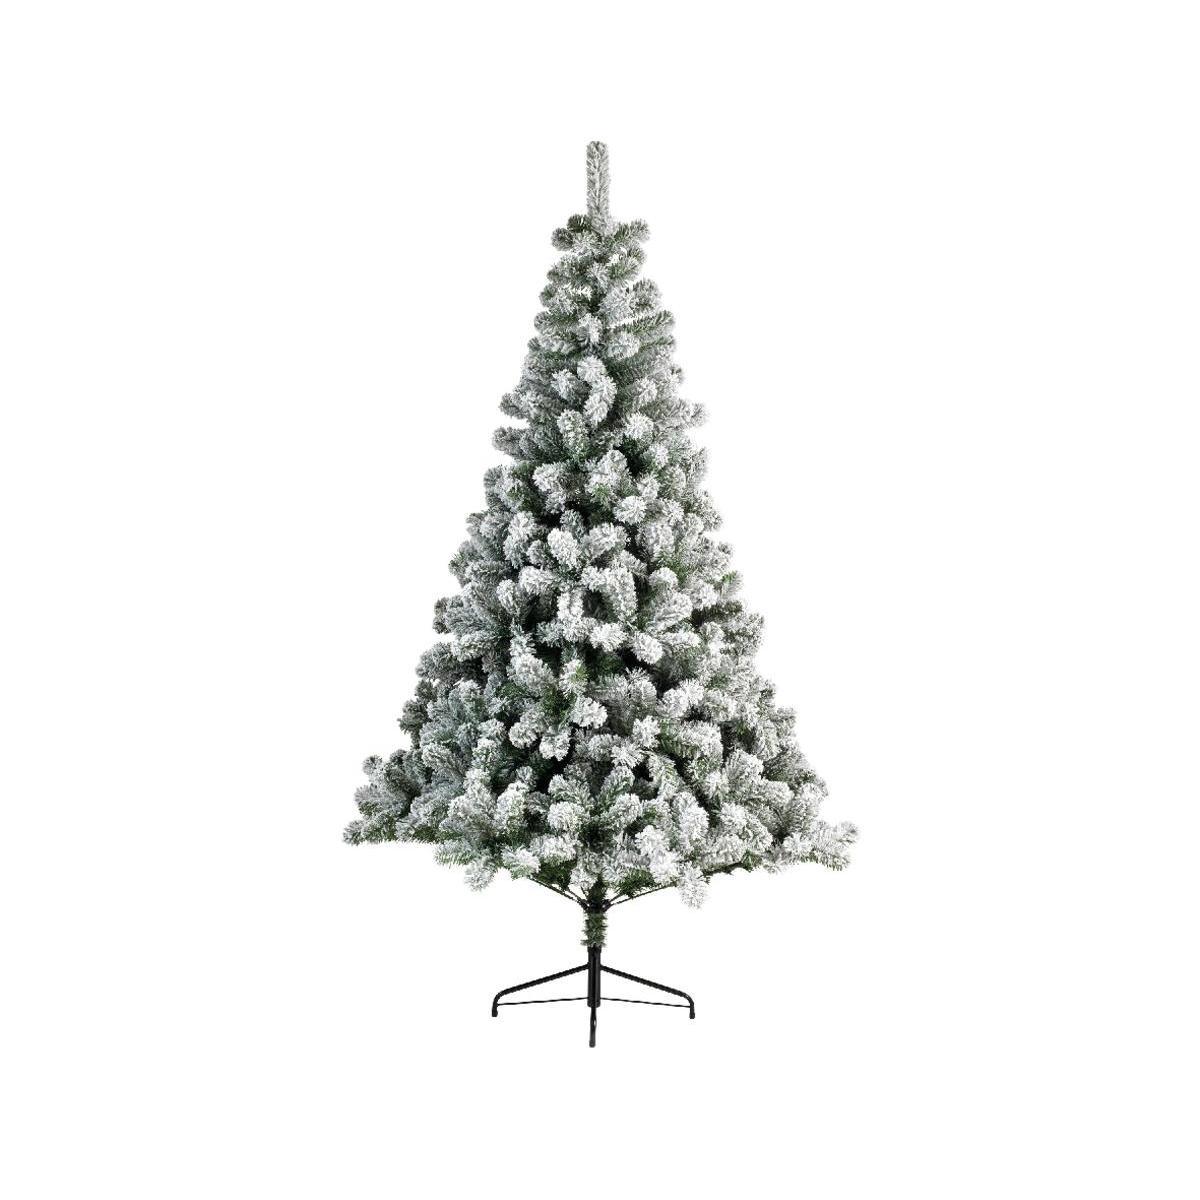 Sapin imperial enneigé nf